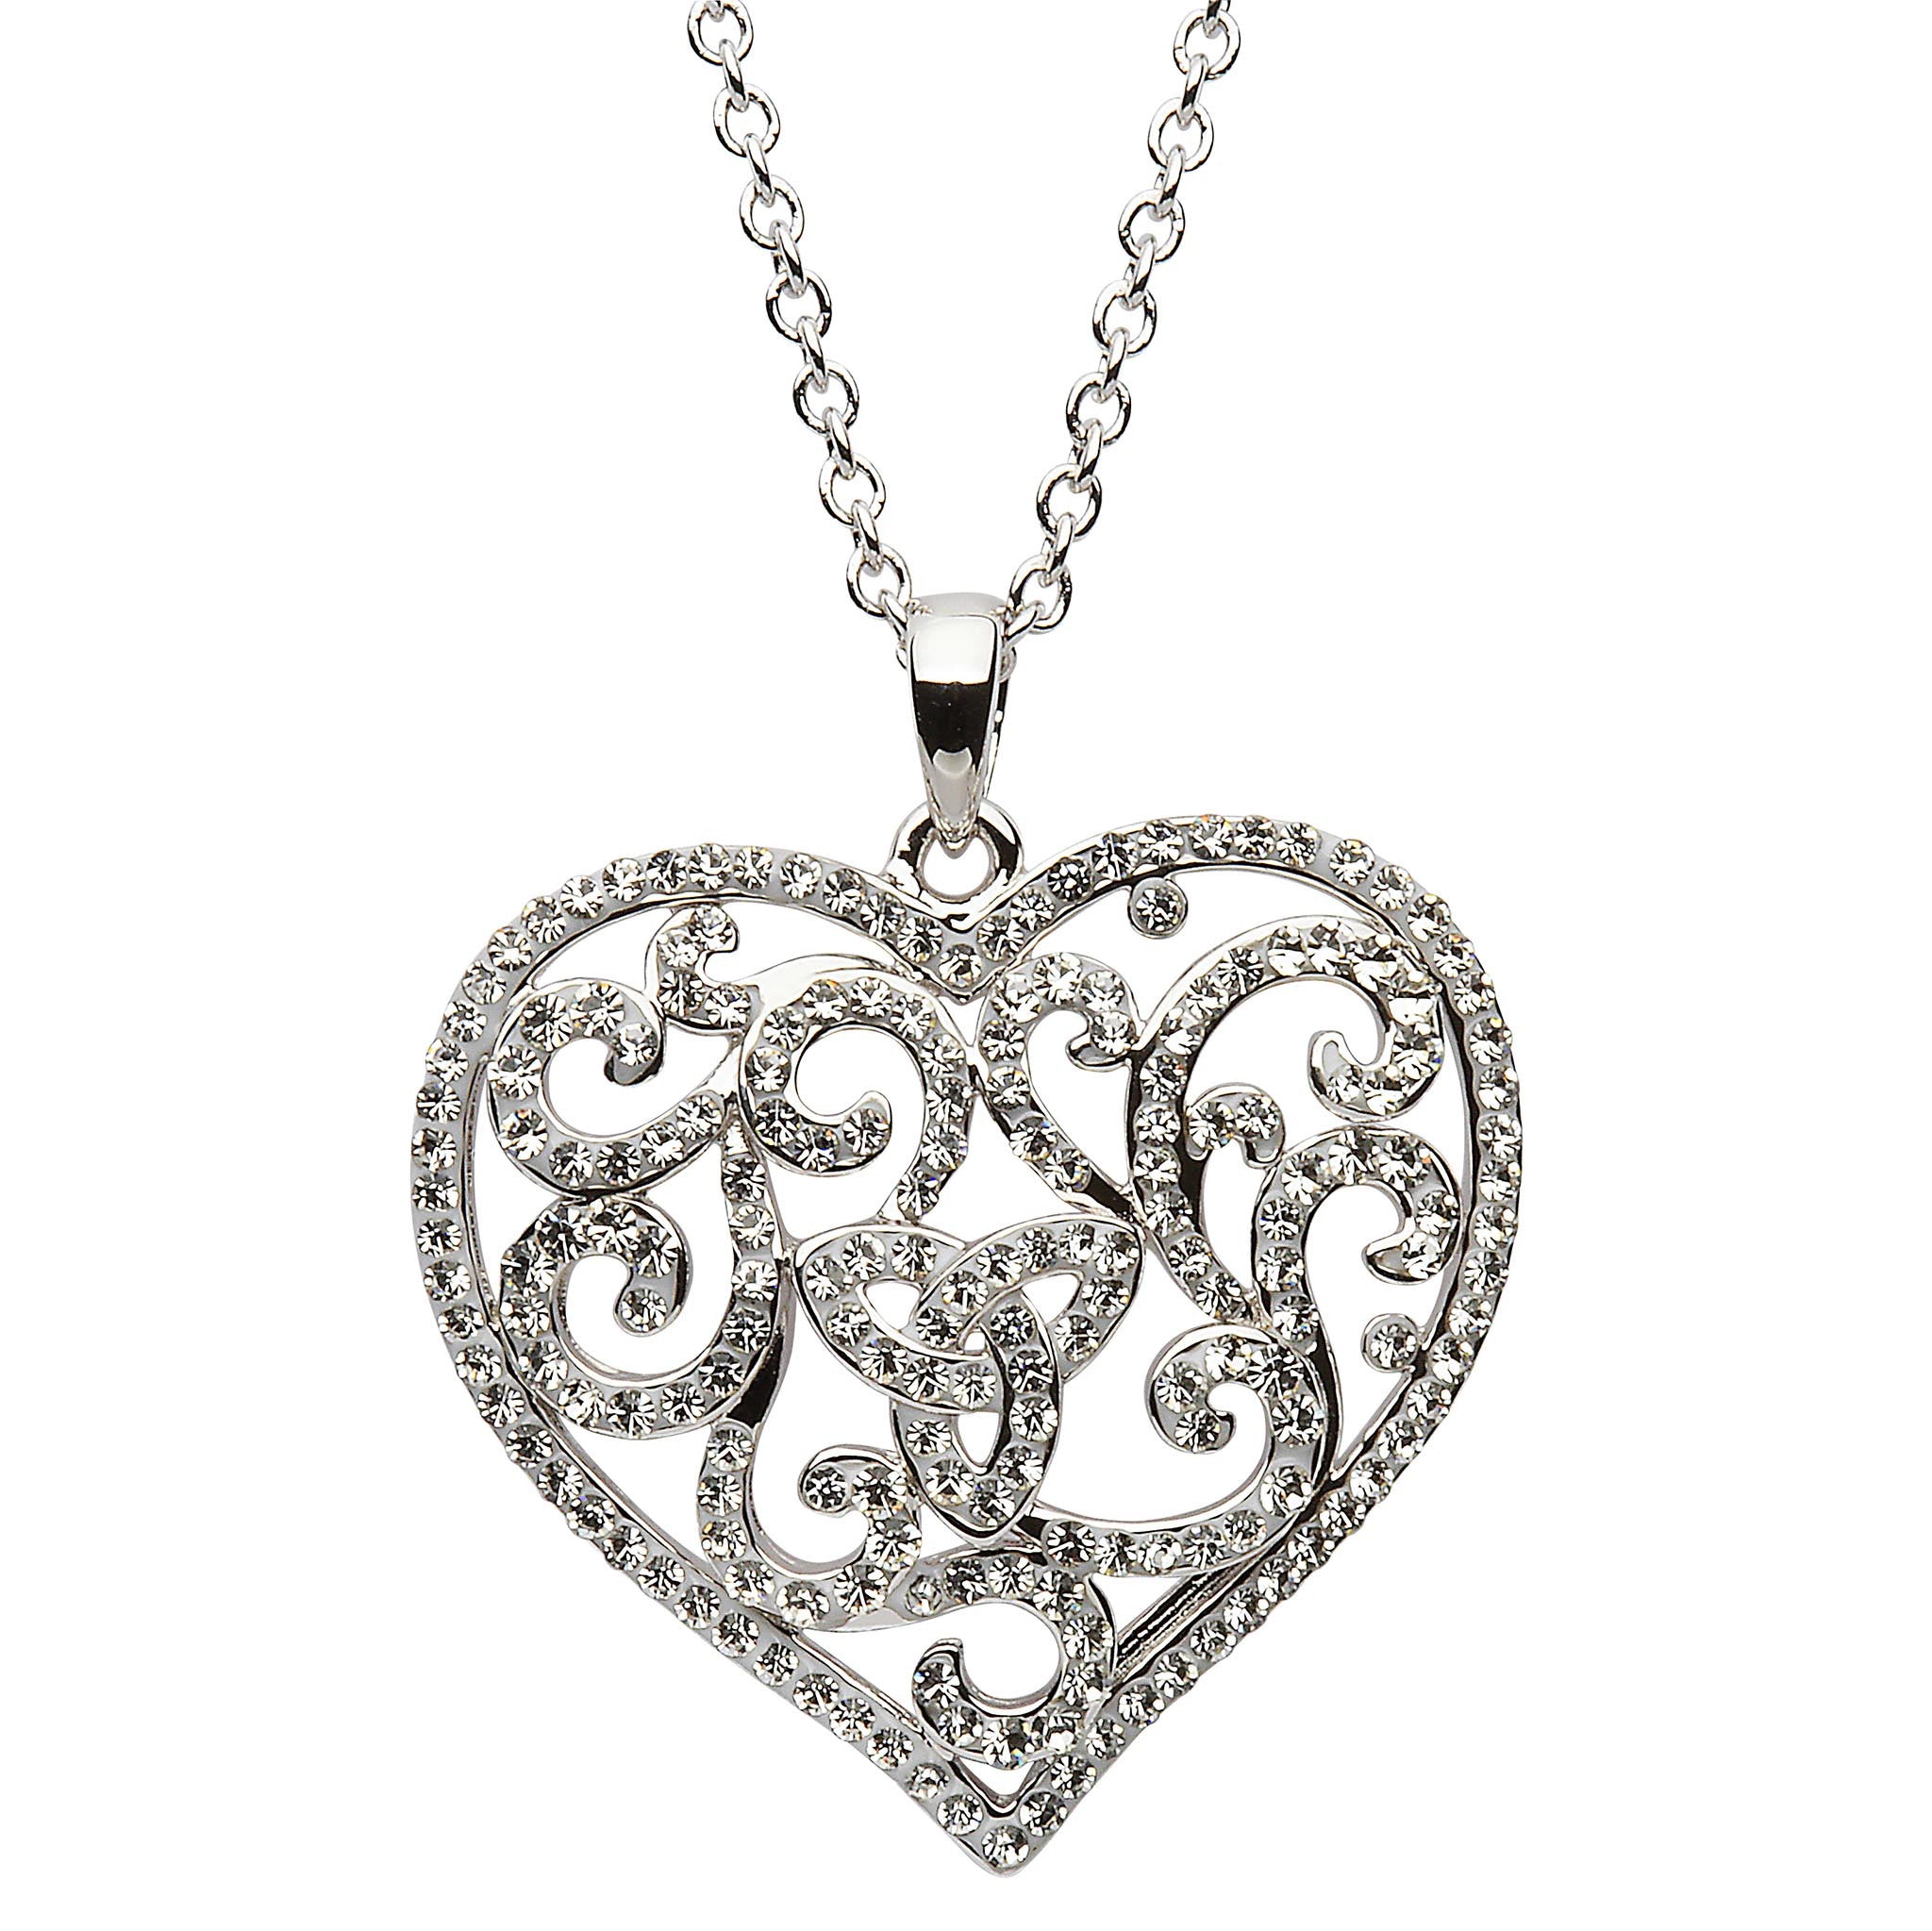 SW54 Heart Trinity Necklace Encrusted With White Swarovski Crystals by Shanore